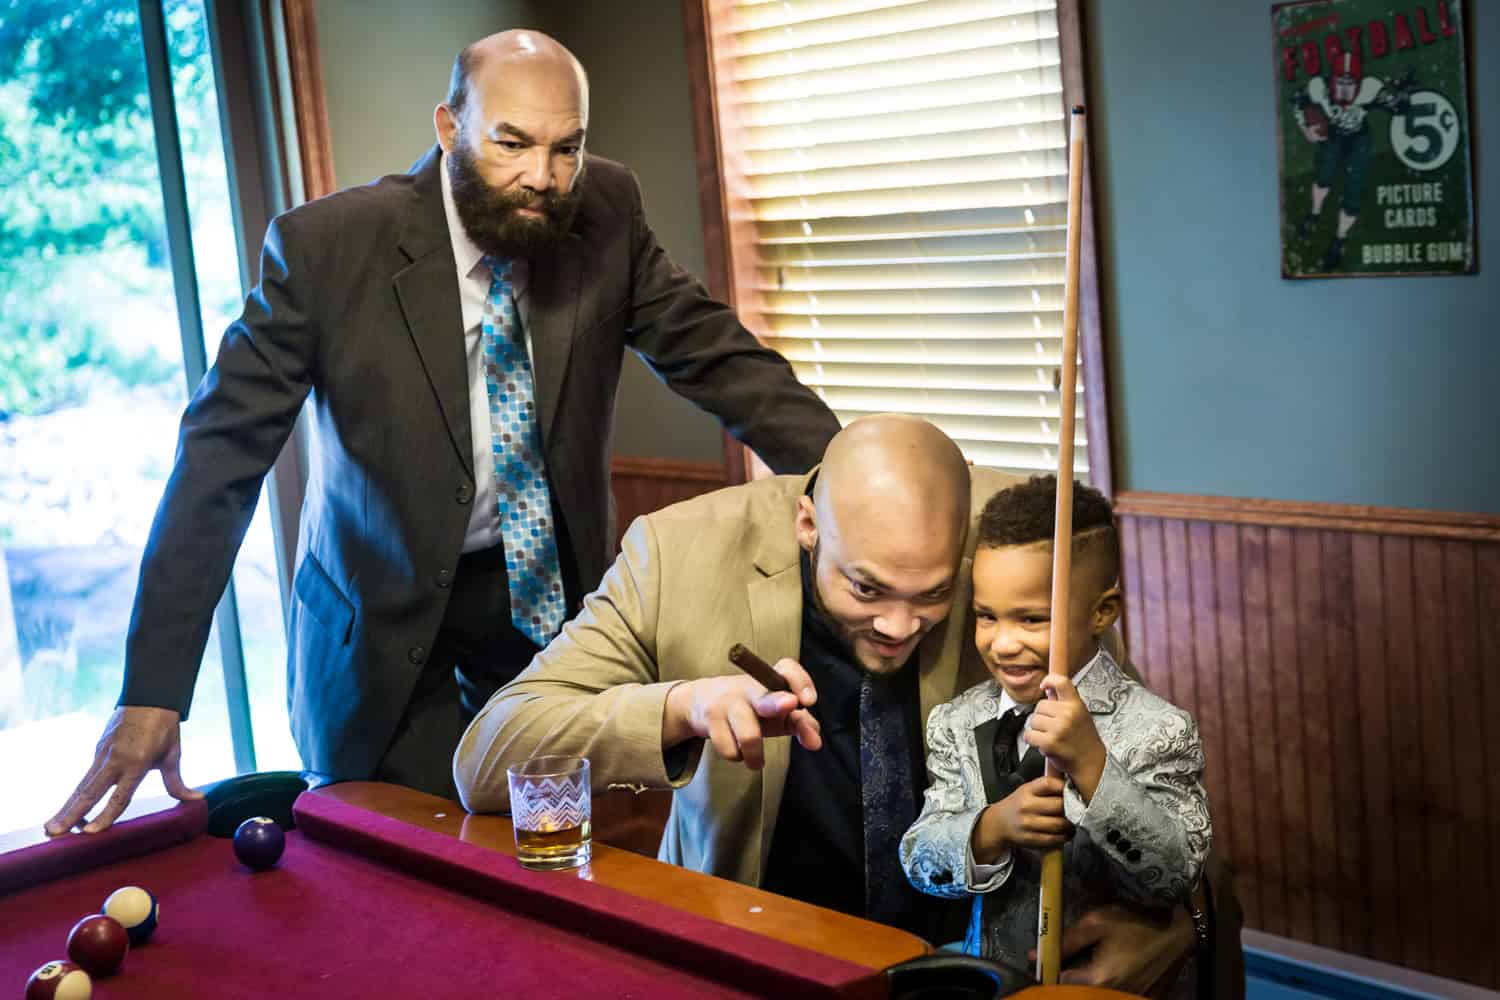 Two male family members helping little boy play pool during a family reunion portrait